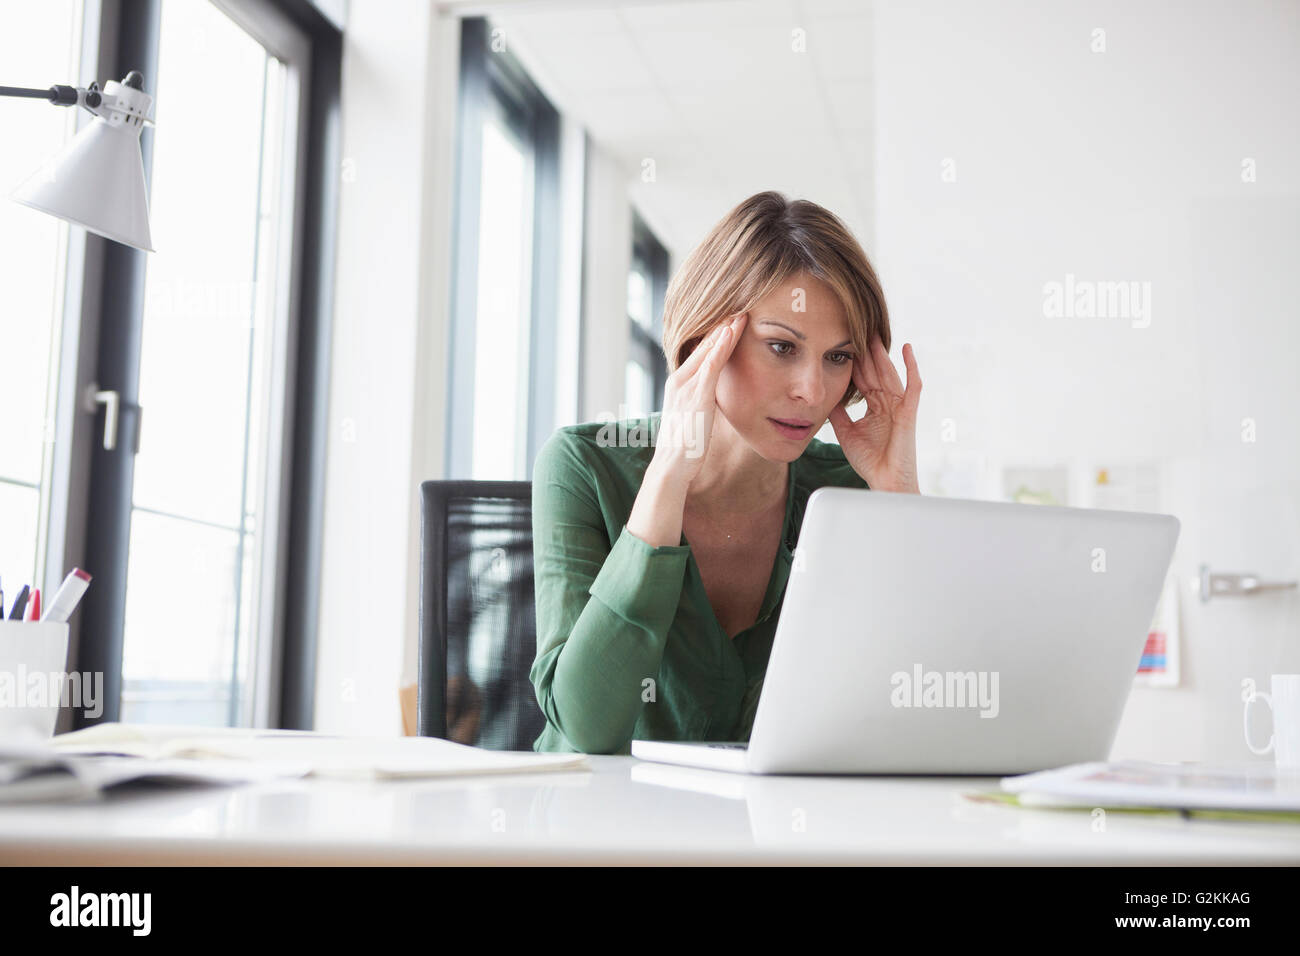 Concentrated businesswoman working on laptop at office desk Stock Photo